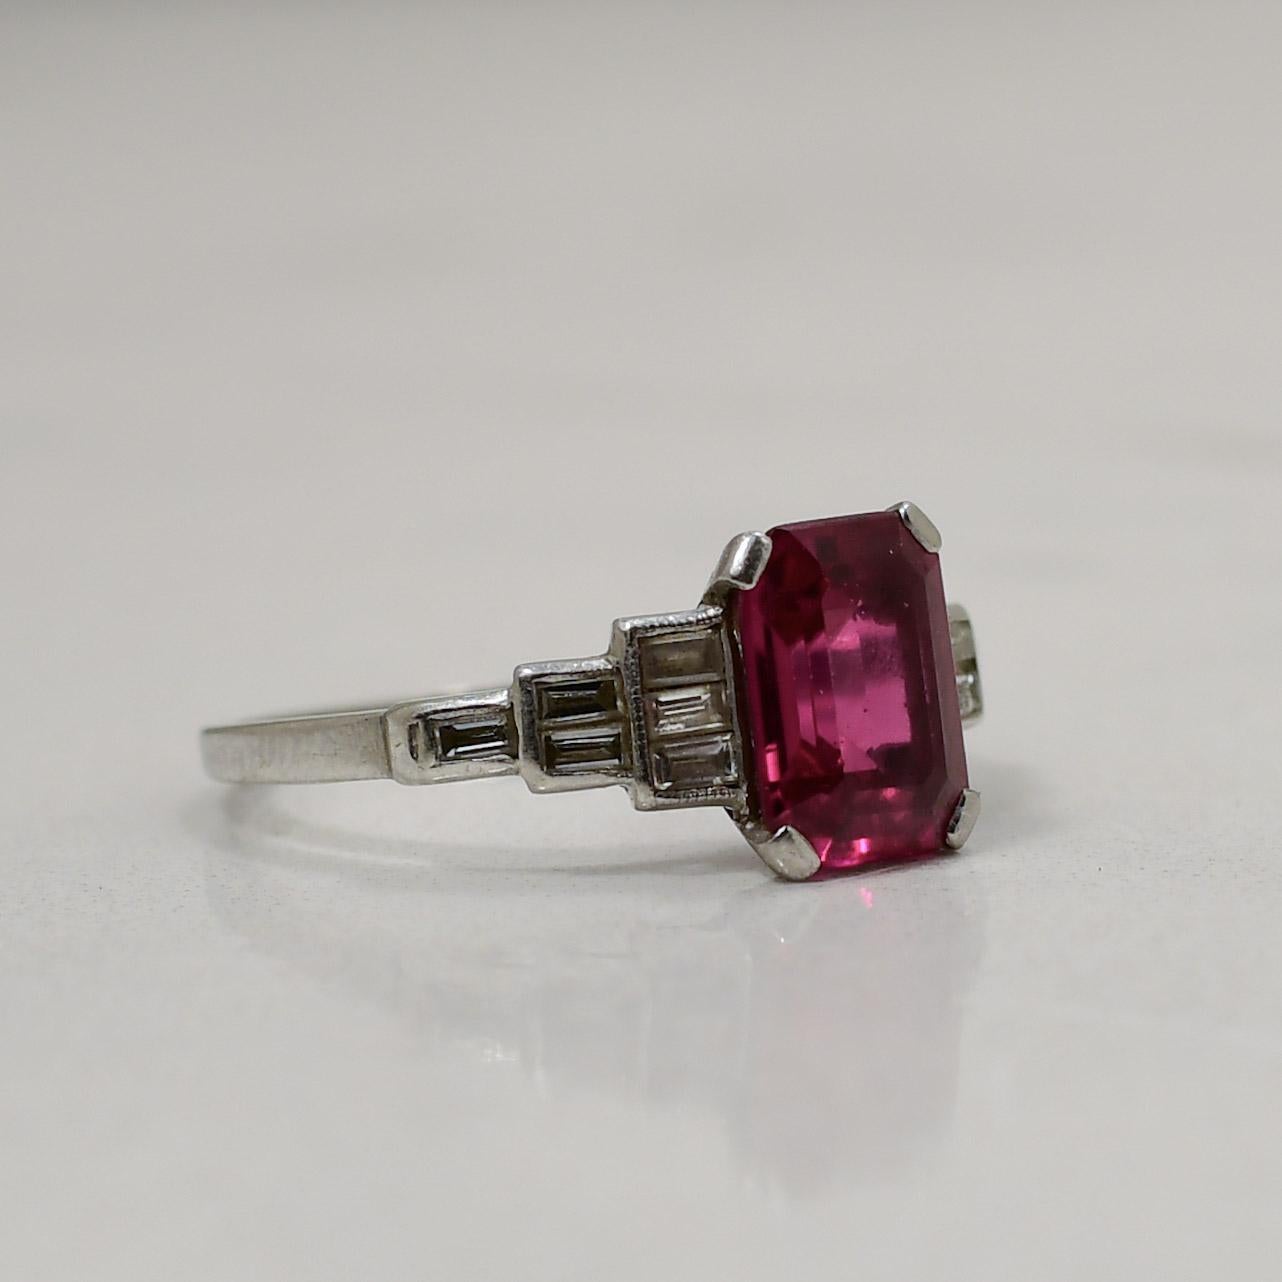 This exquisite vintage-inspired platinum ring showcases a lab-grown ruby of unparalleled quality, meticulously cornered within a rectangular faceted setting that evokes timeless elegance. The rich, crimson hue of the lab-grown ruby is accentuated by